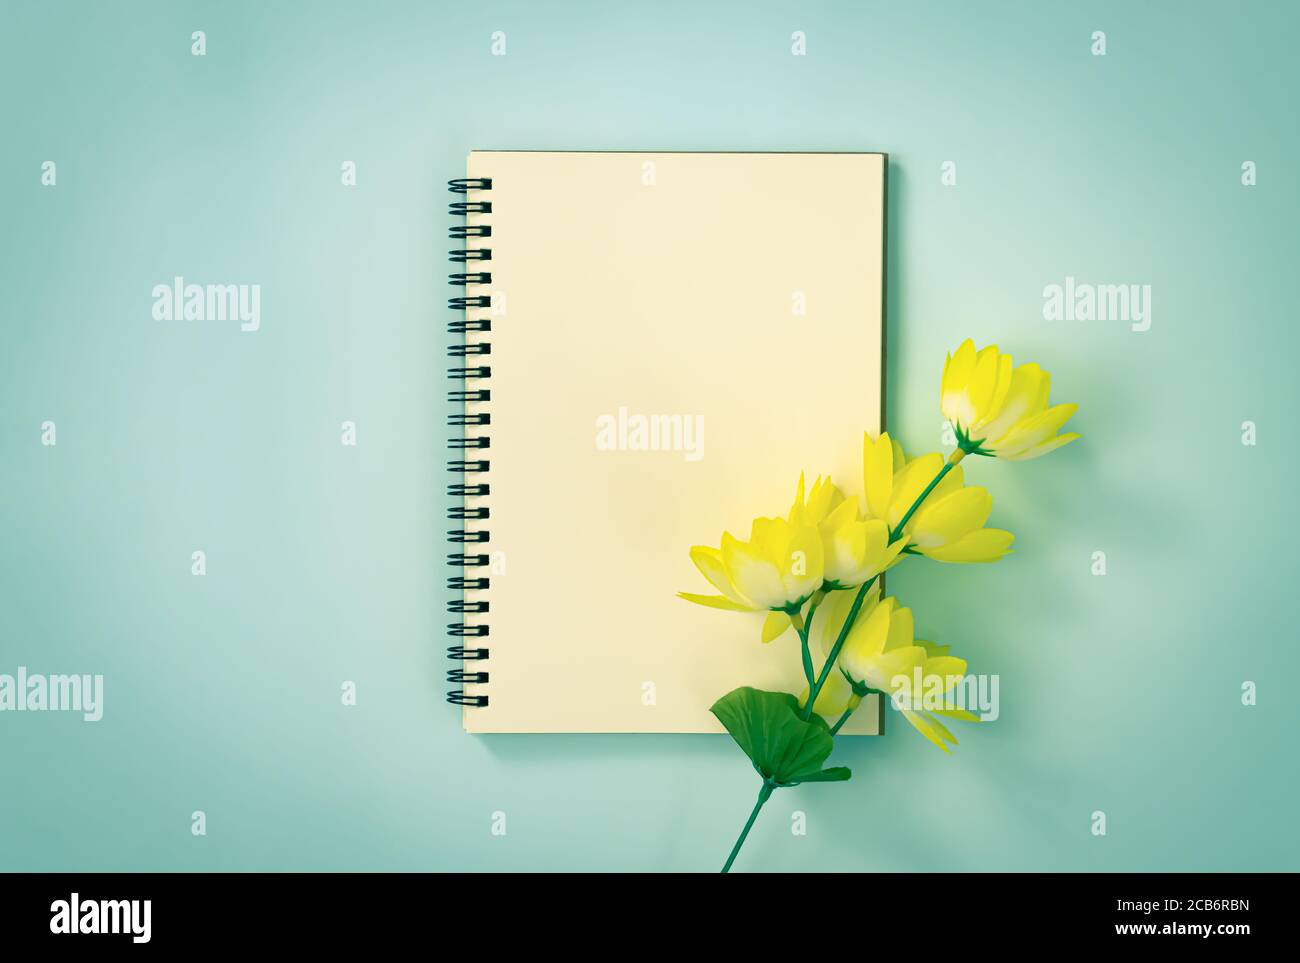 Spiral Notebook or Spring Notebook in Unlined Type and Yellow Flowers at Bottom Right on Blue Pastel Minimalist Background in Vintage Tone Stock Photo